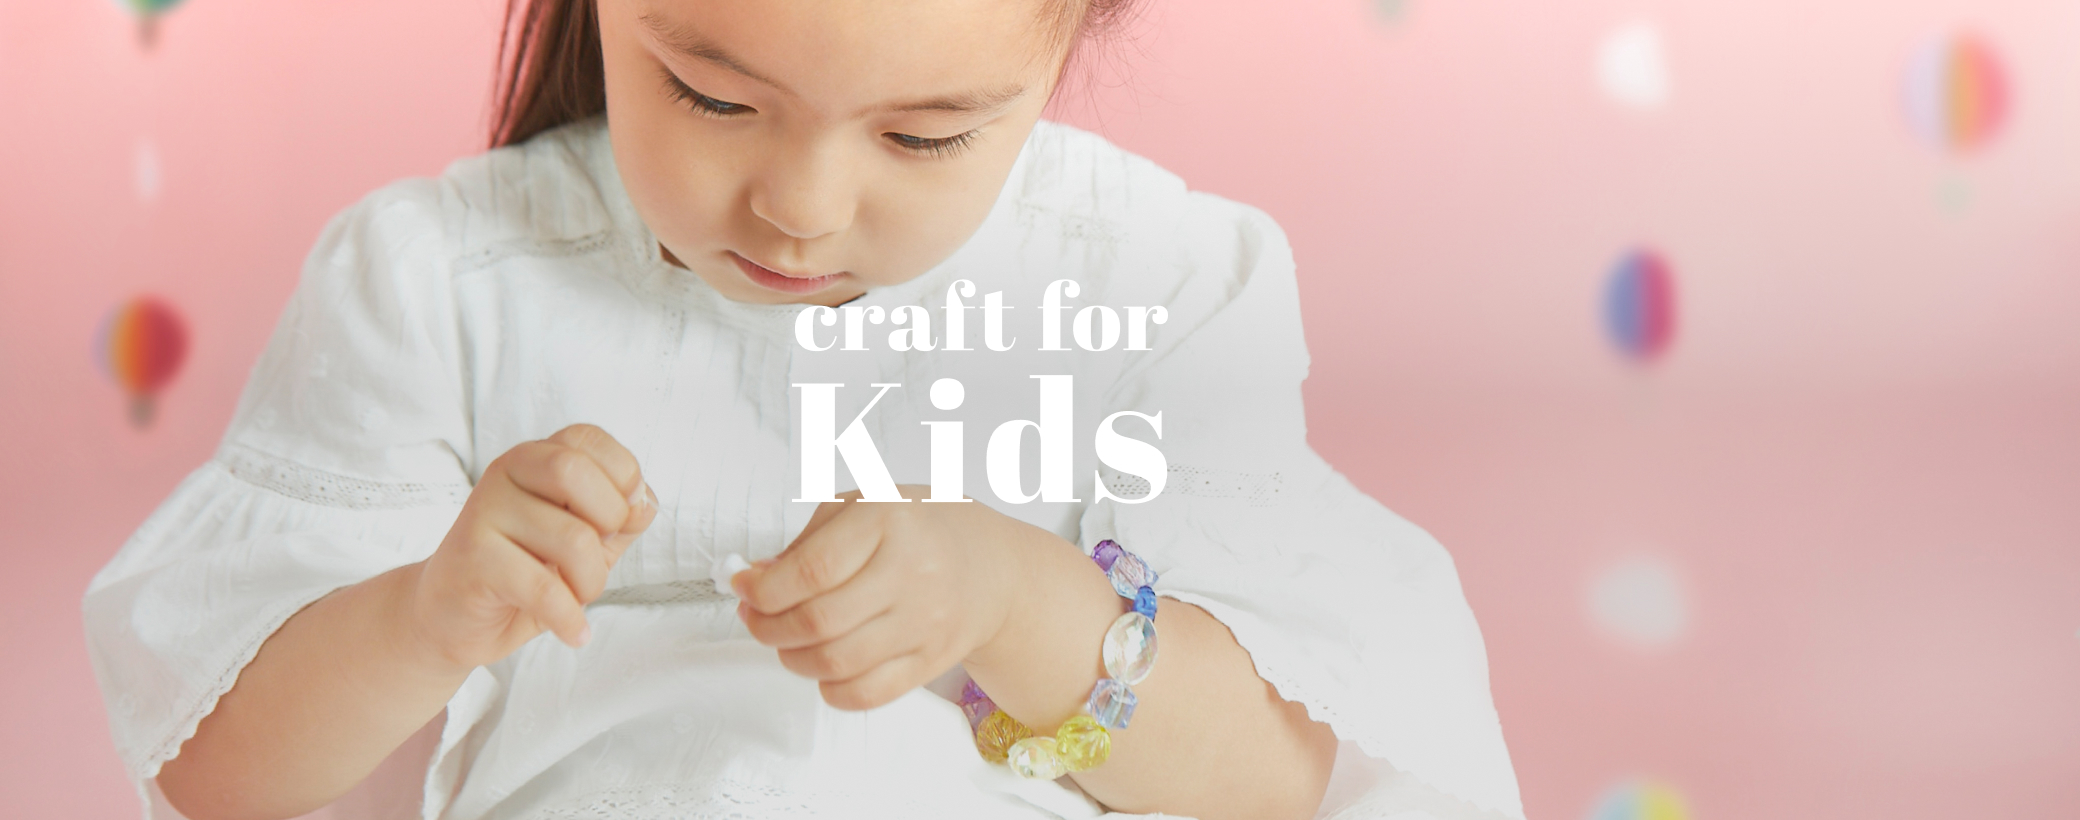 craft for Kids